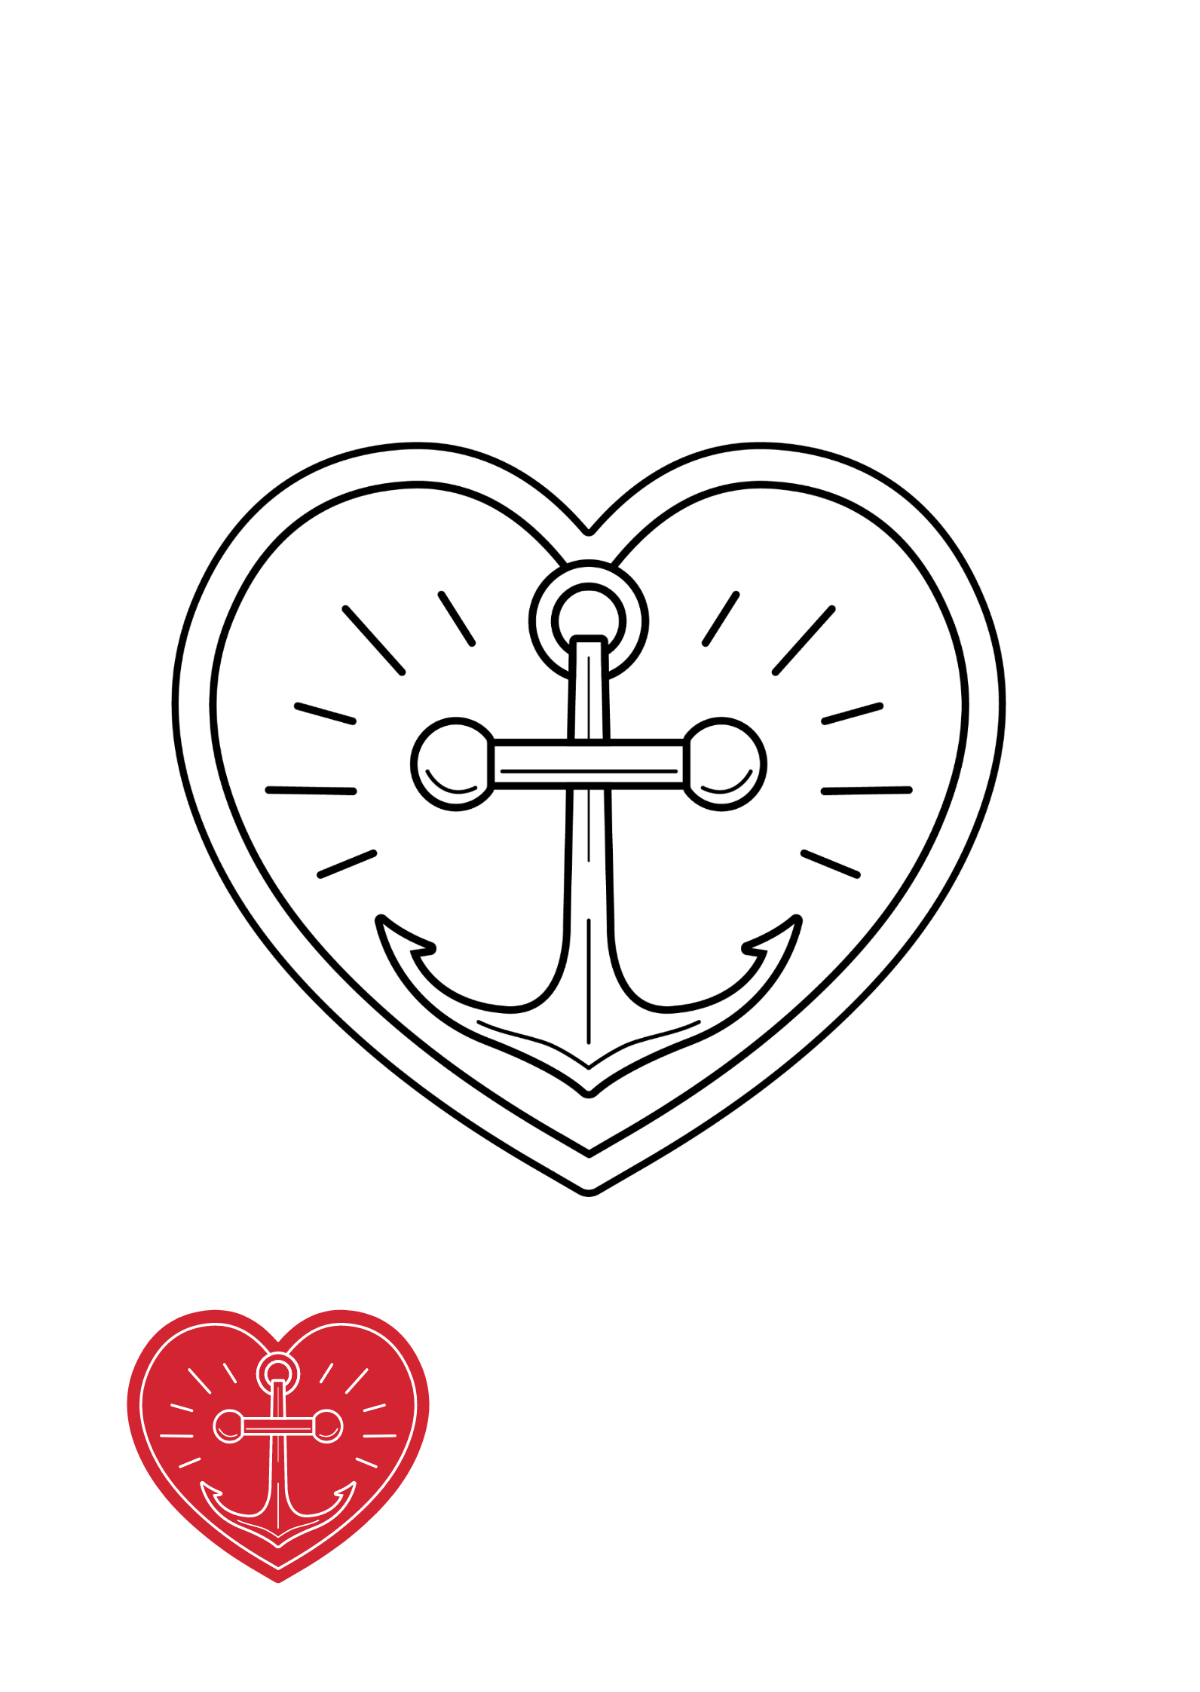 Anchor Heart Coloring Page Template